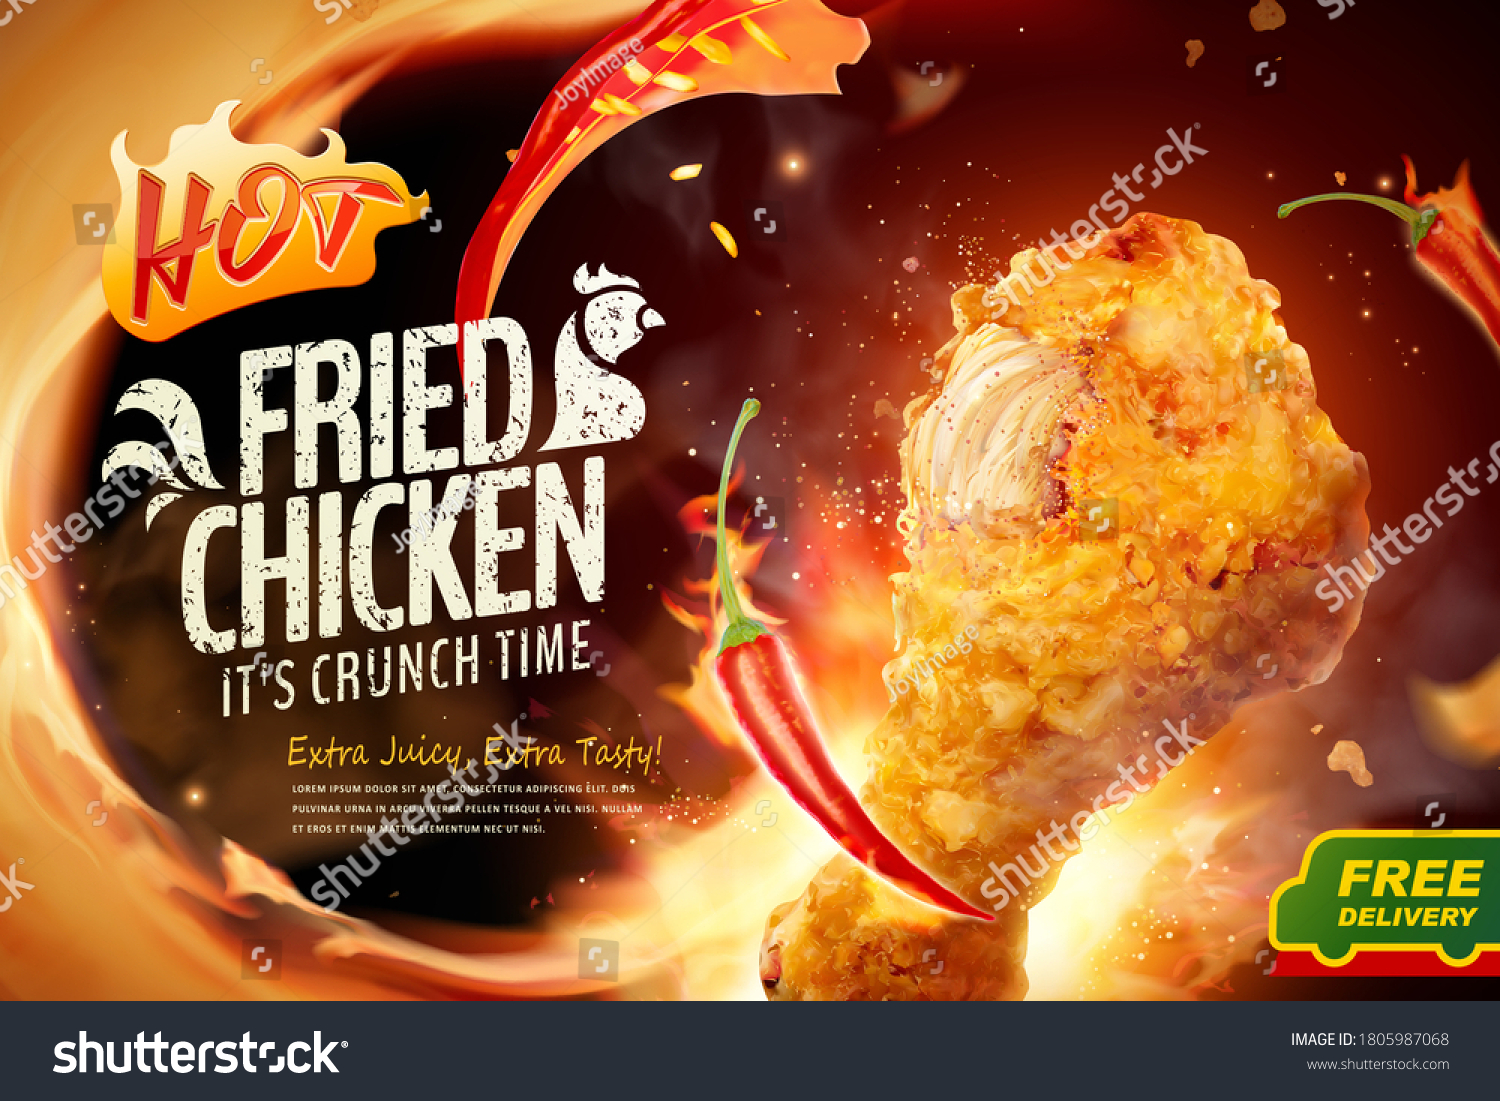 Delicious fried chicken in 3d illustration with fire and chili, concept of spicy flavor #1805987068